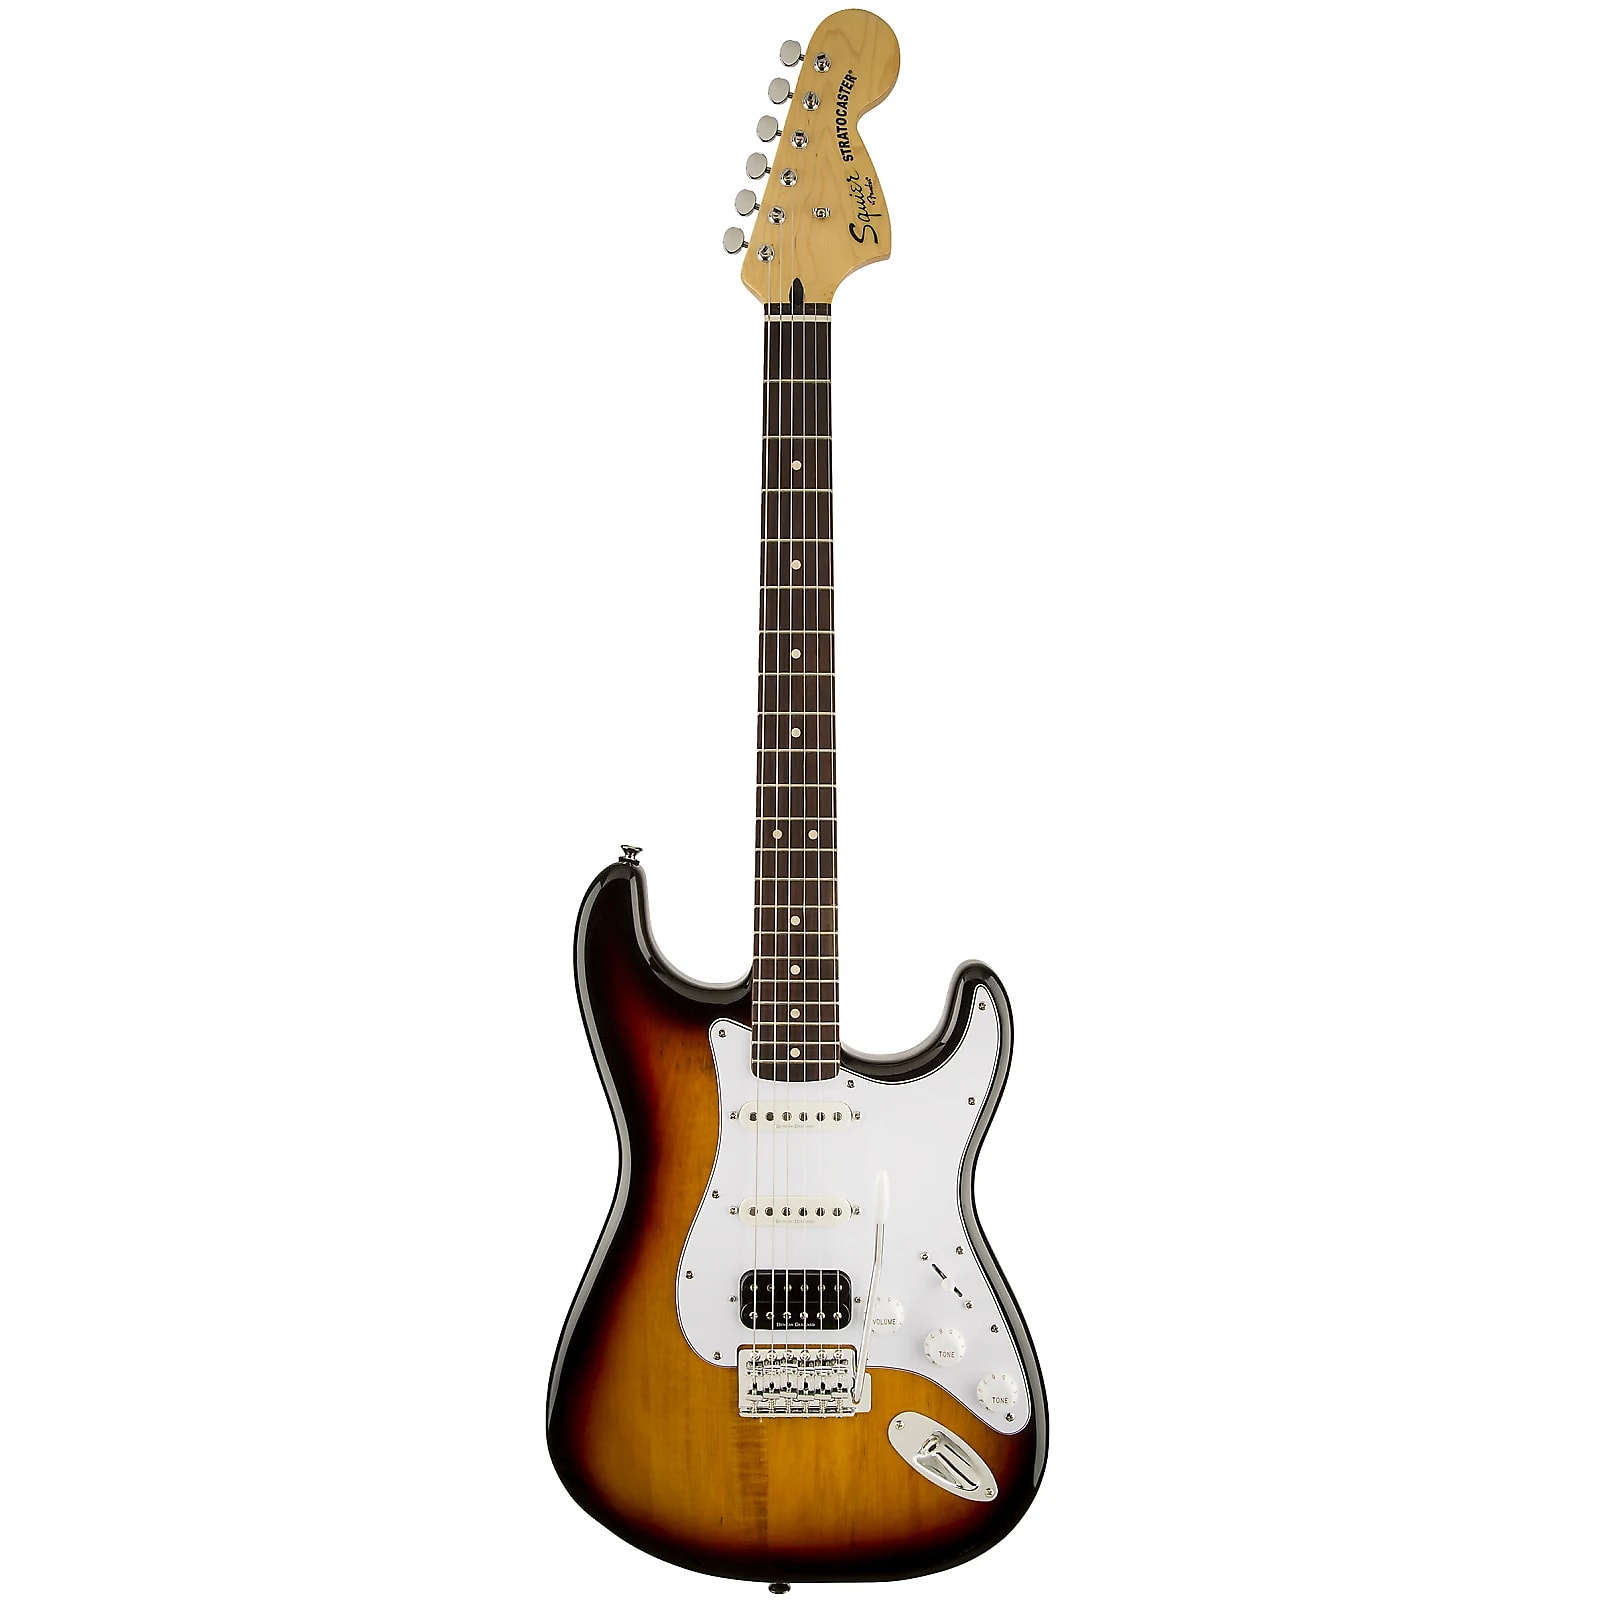 Squier Vintage Modified Stratocaster HSS 2012 - 2019 | Reverb